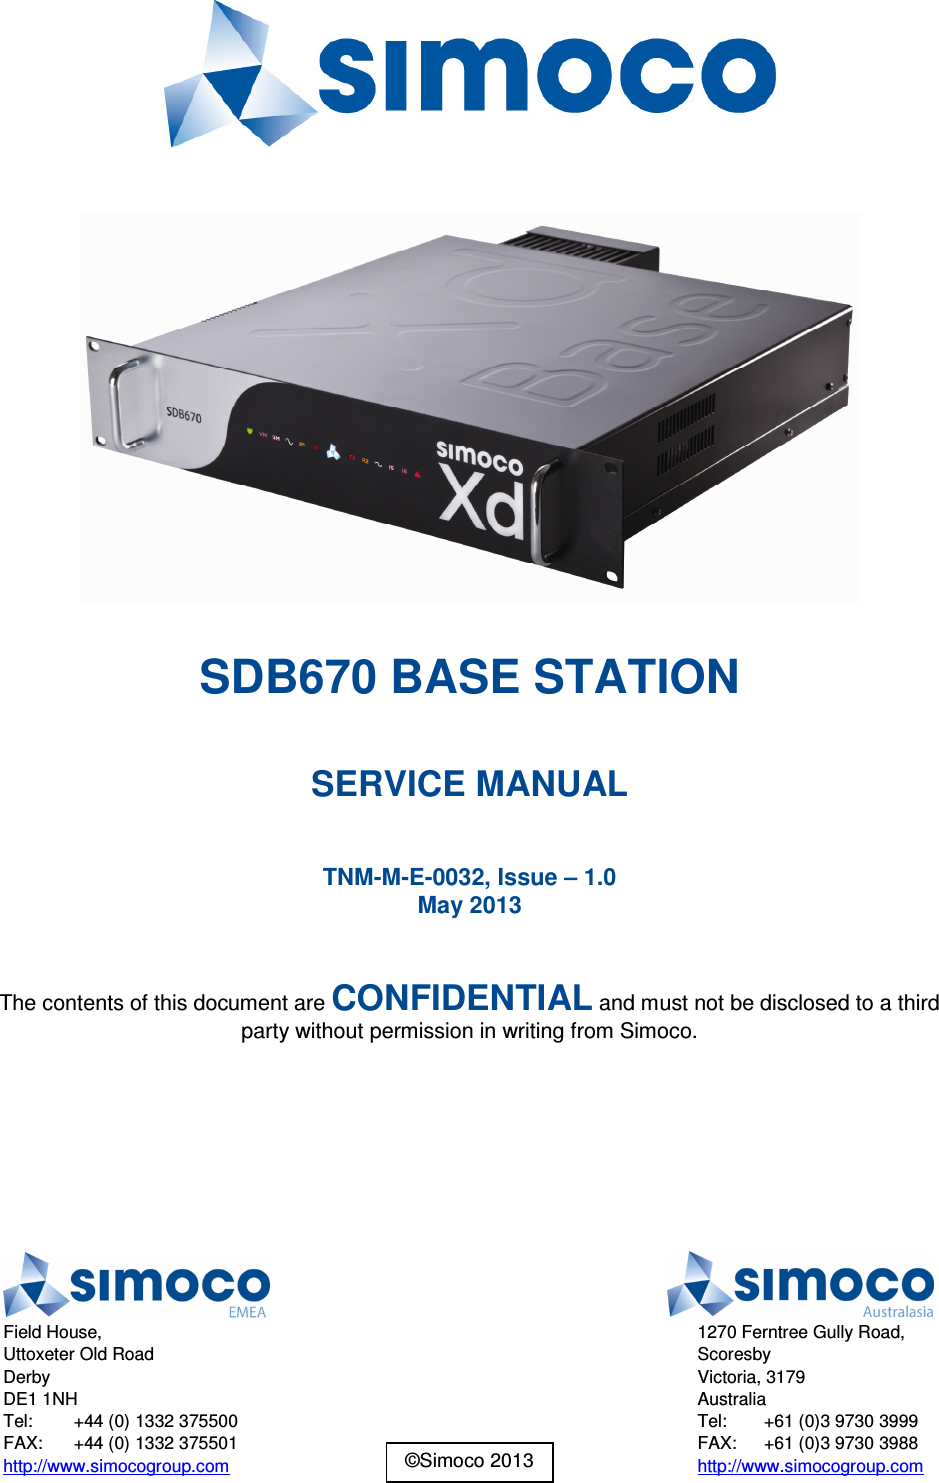    SDB670 BASE STATION  SERVICE MANUAL  TNM-M-E-0032, Issue – 1.0 May 2013  The contents of this document are CONFIDENTIAL and must not be disclosed to a third party without permission in writing from Simoco.   ©Simoco 2013  Field House, Uttoxeter Old Road Derby DE1 1NH Tel:  +44 (0) 1332 375500 FAX:  +44 (0) 1332 375501 http://www.simocogroup.com  1270 Ferntree Gully Road, Scoresby Victoria, 3179 Australia Tel:  +61 (0)3 9730 3999 FAX:  +61 (0)3 9730 3988 http://www.simocogroup.com 